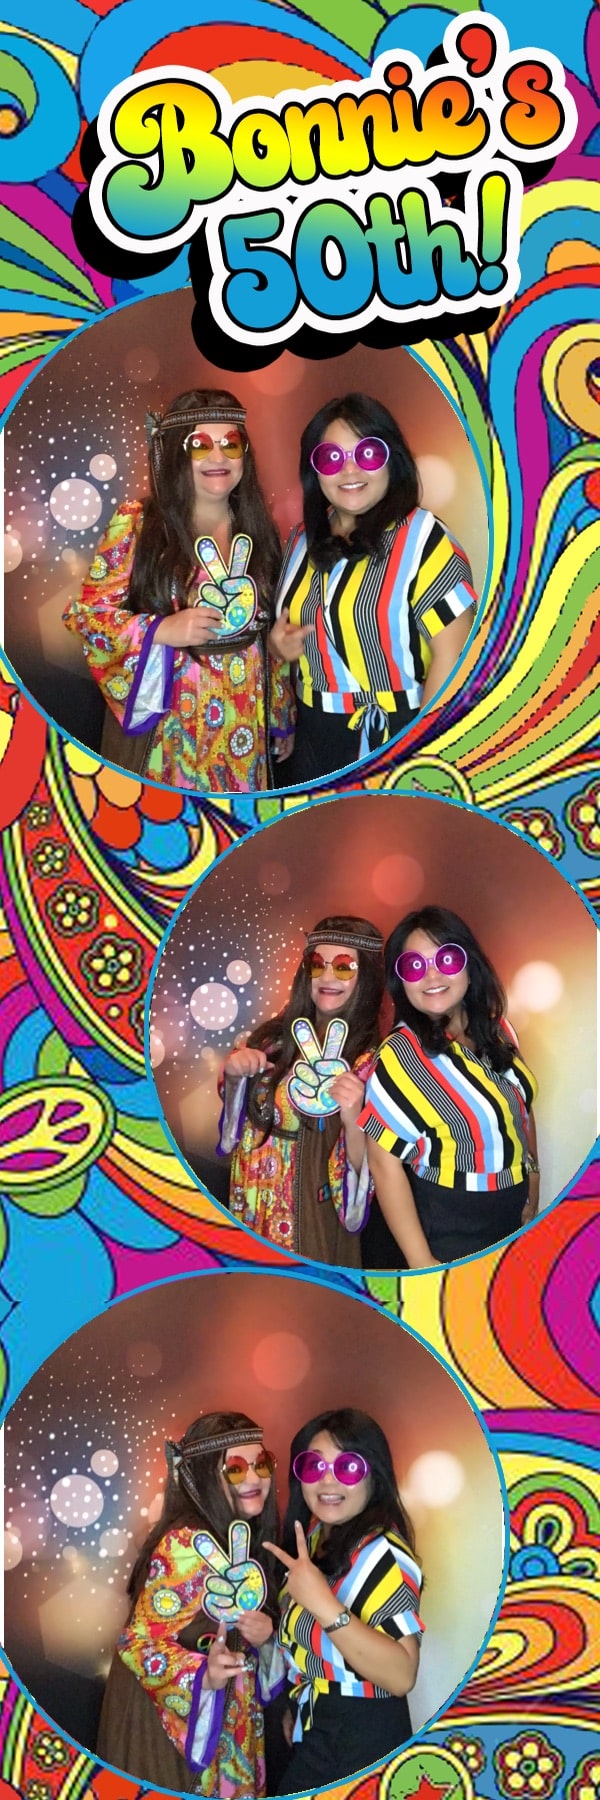 Psychedelic photo strip with two people in hippie costumes